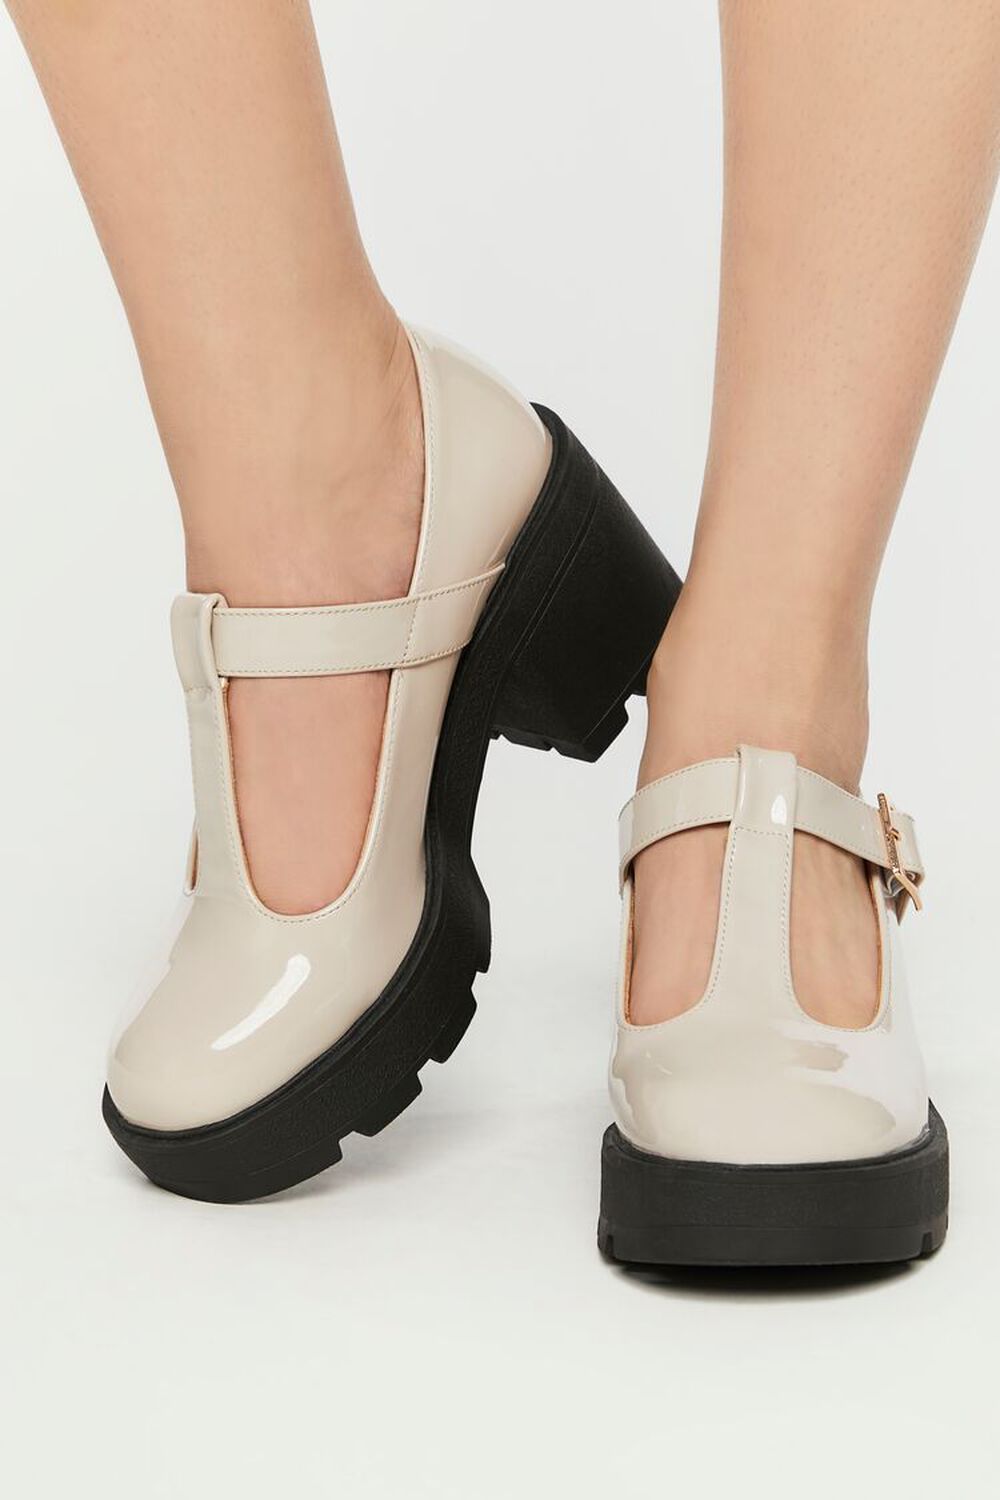 CREAM Faux Patent Leather T-Strap Mary Jane Heels, image 1